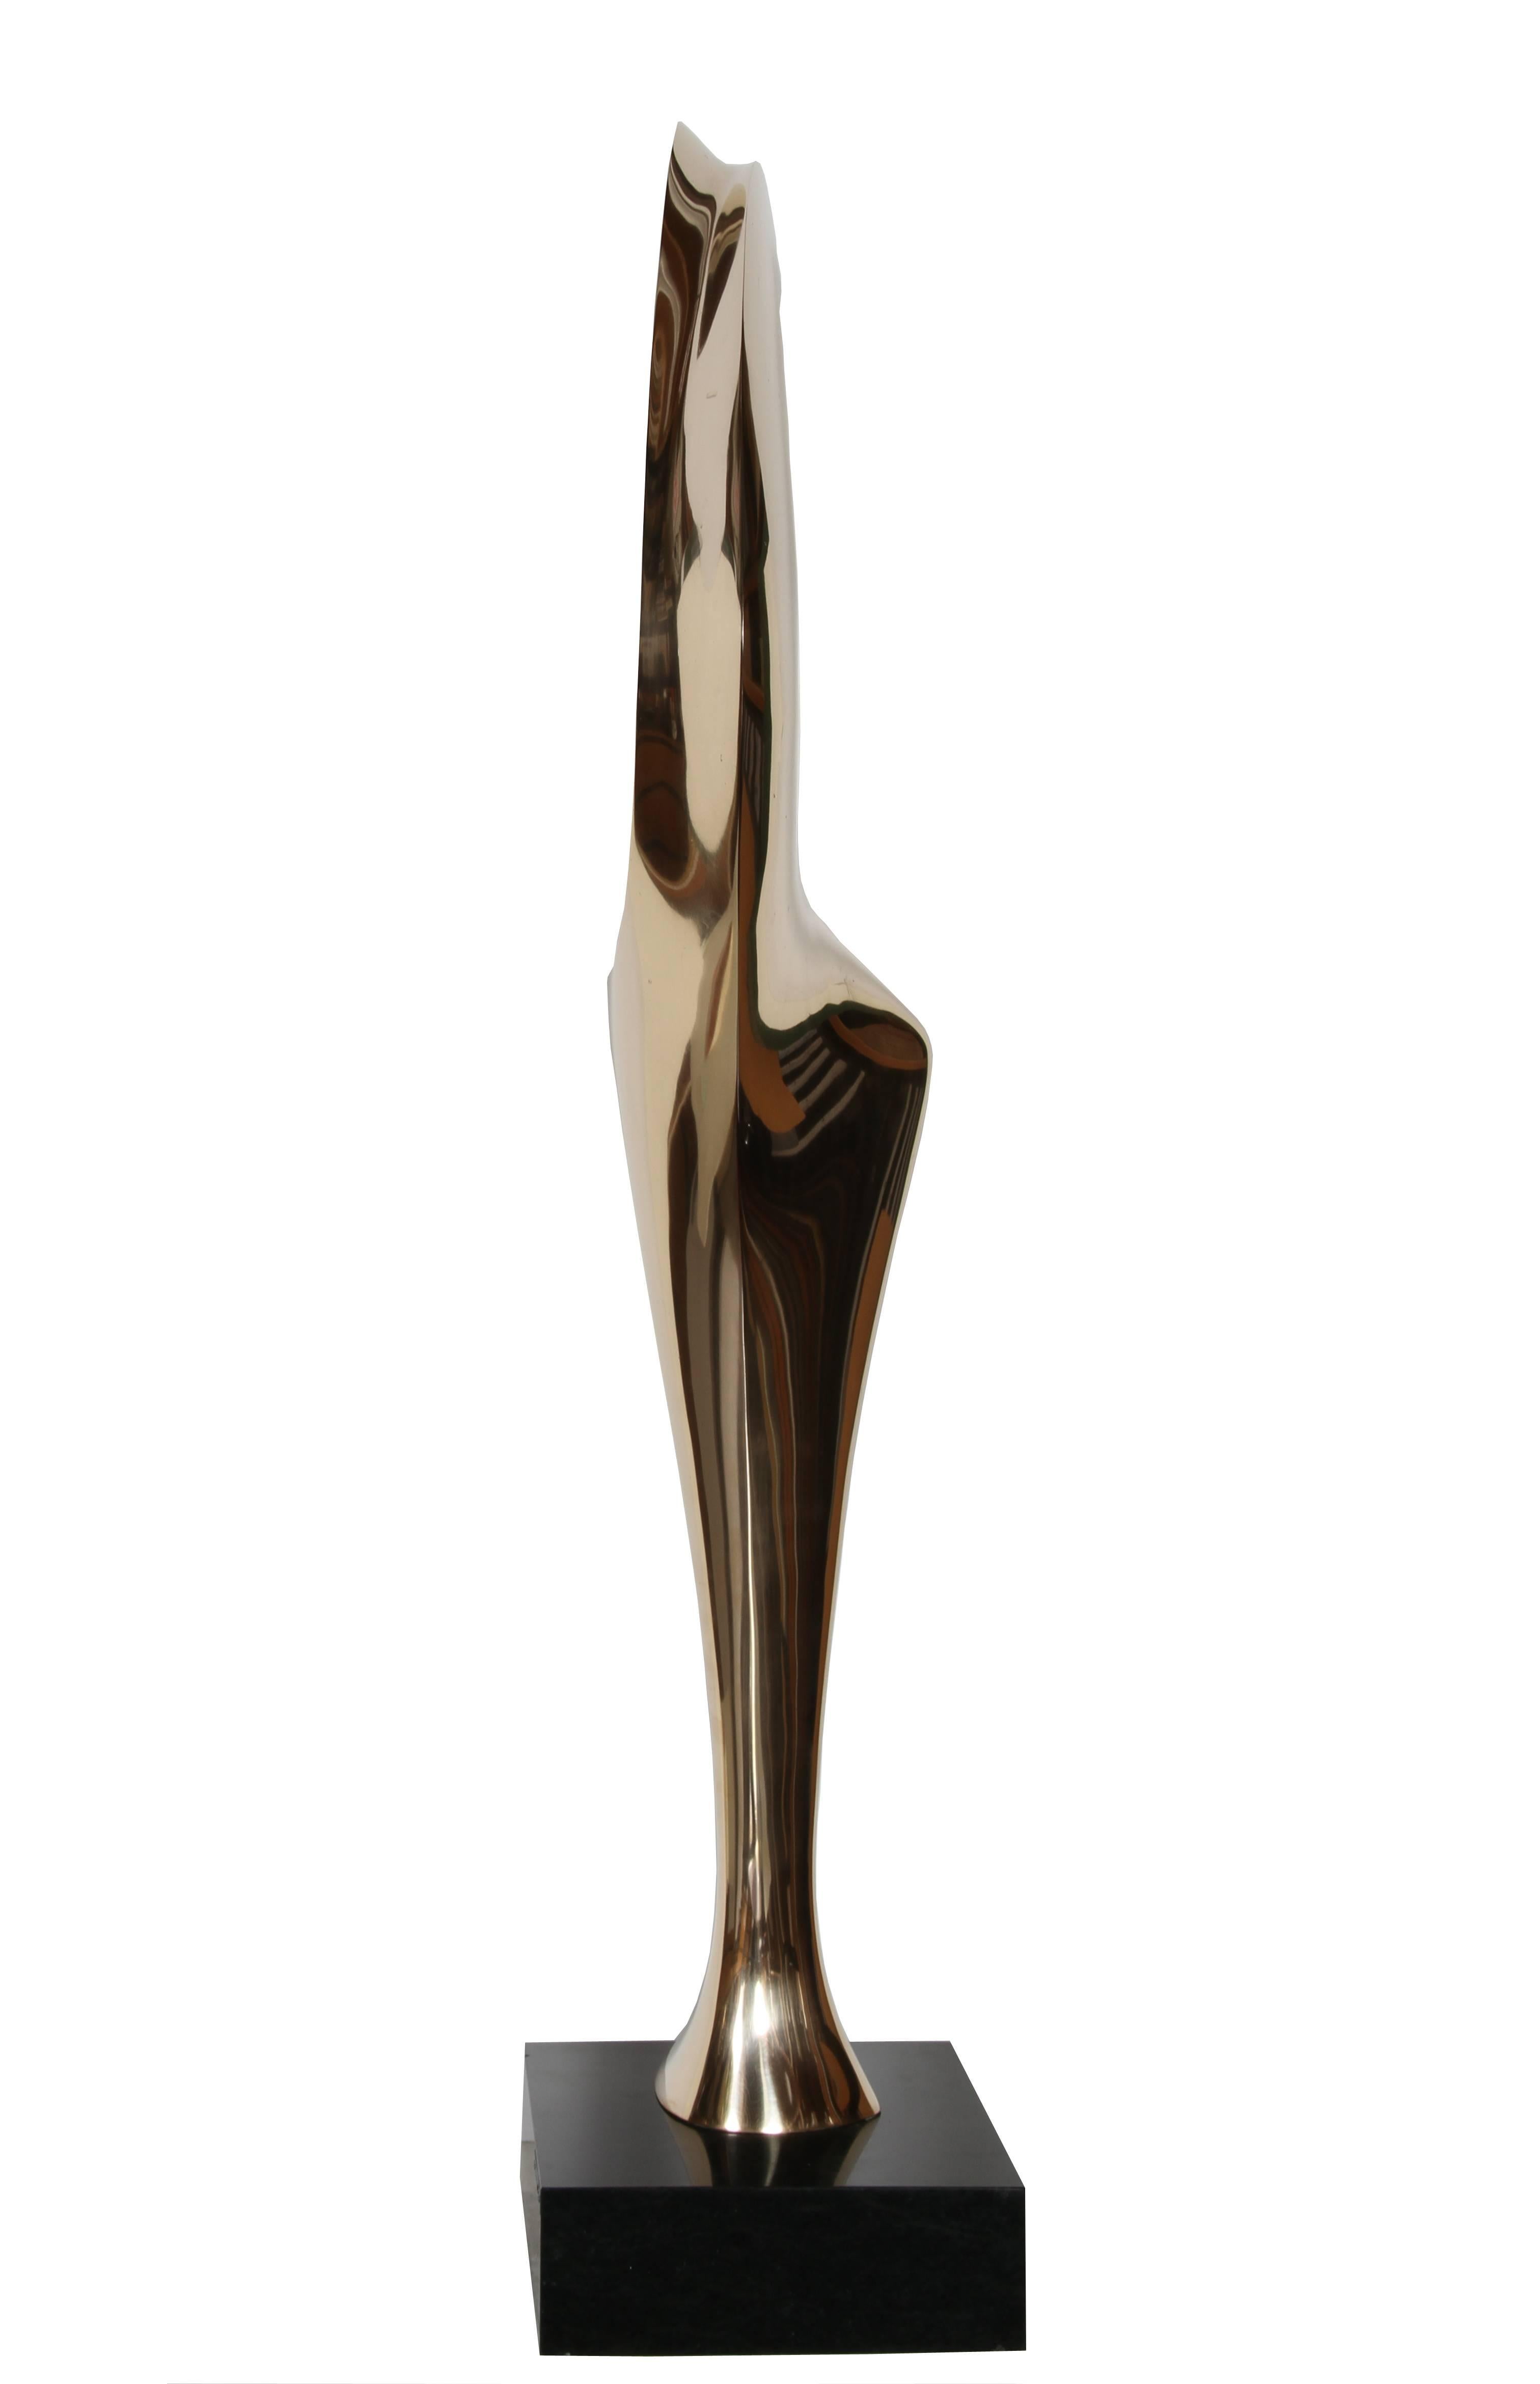 Artist: Antoine Poncet, Swiss (1928 - )
Title: Cororeol
Medium: Polished Bronze Sculpture, Signature 'A.P.' inscribed
Edition: 2/6
Size: 41 in. x 21 in. x 5 in. (104.14 cm x 53.34 cm x 12.7 cm)
Base: 11 x 9 x 3.5 inches 
